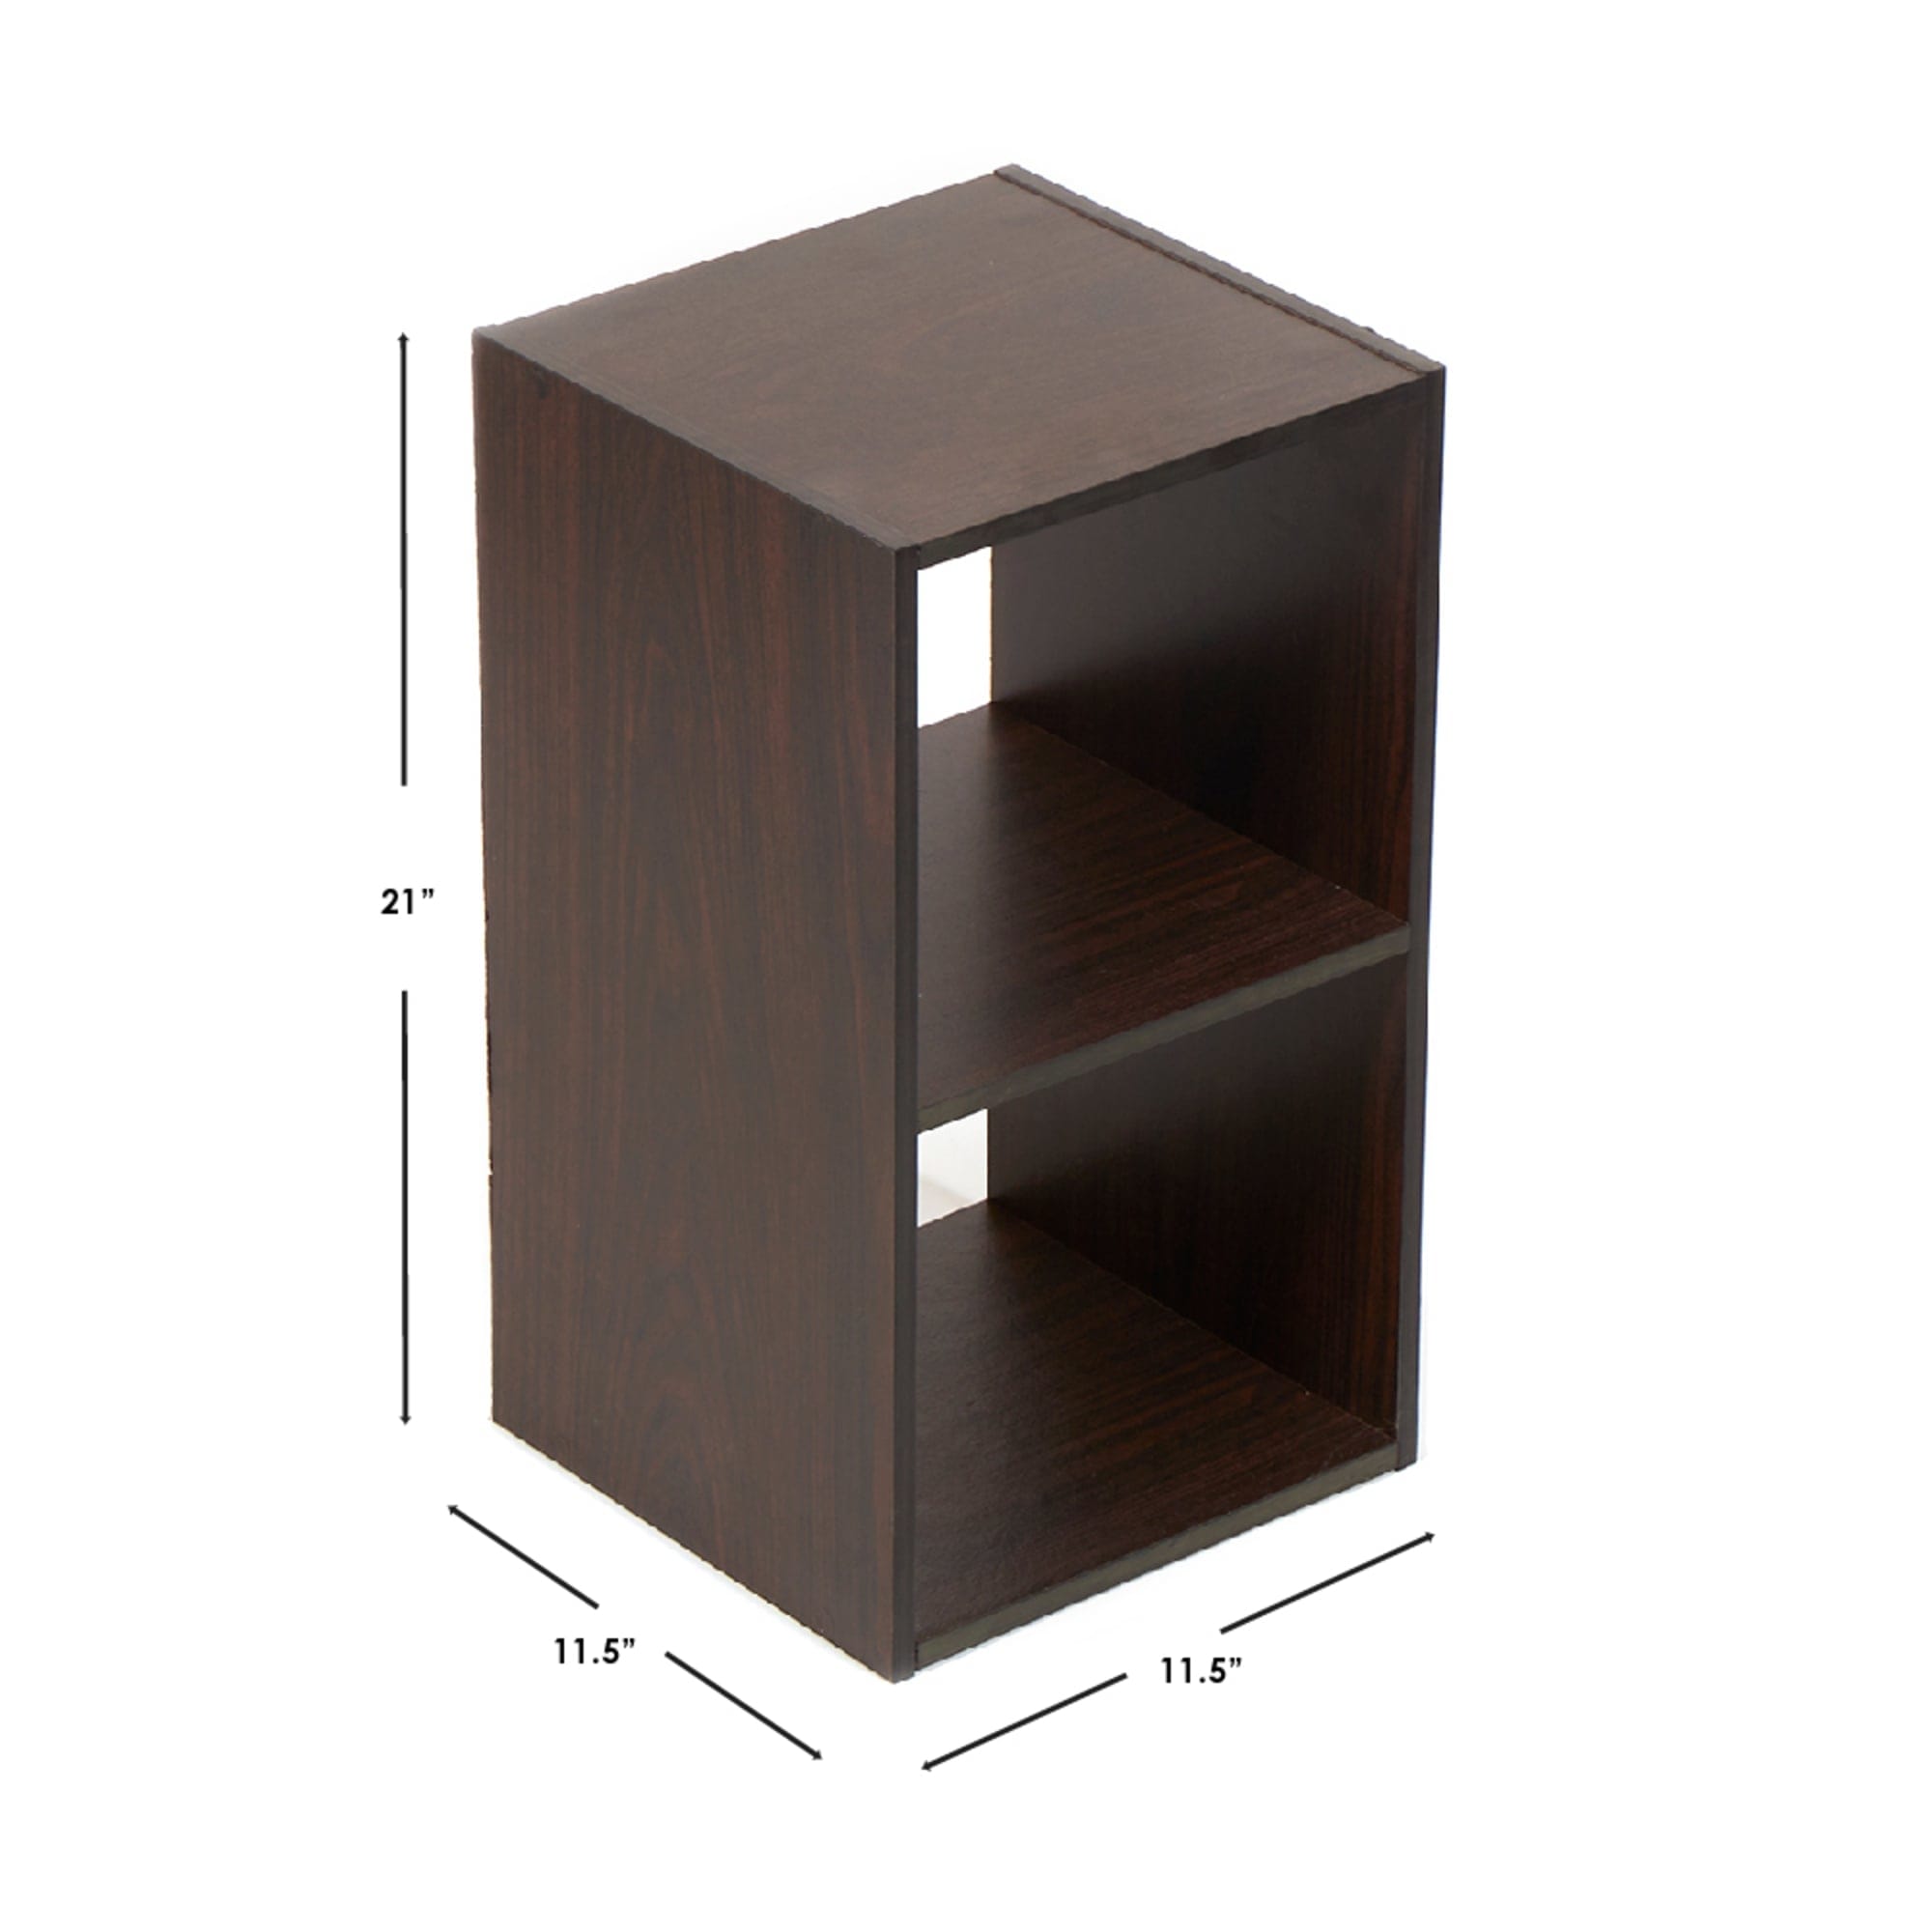 Home Basics Open and Enclosed  2 Cube MDF Storage Organizer, Espresso $18.00 EACH, CASE PACK OF 1